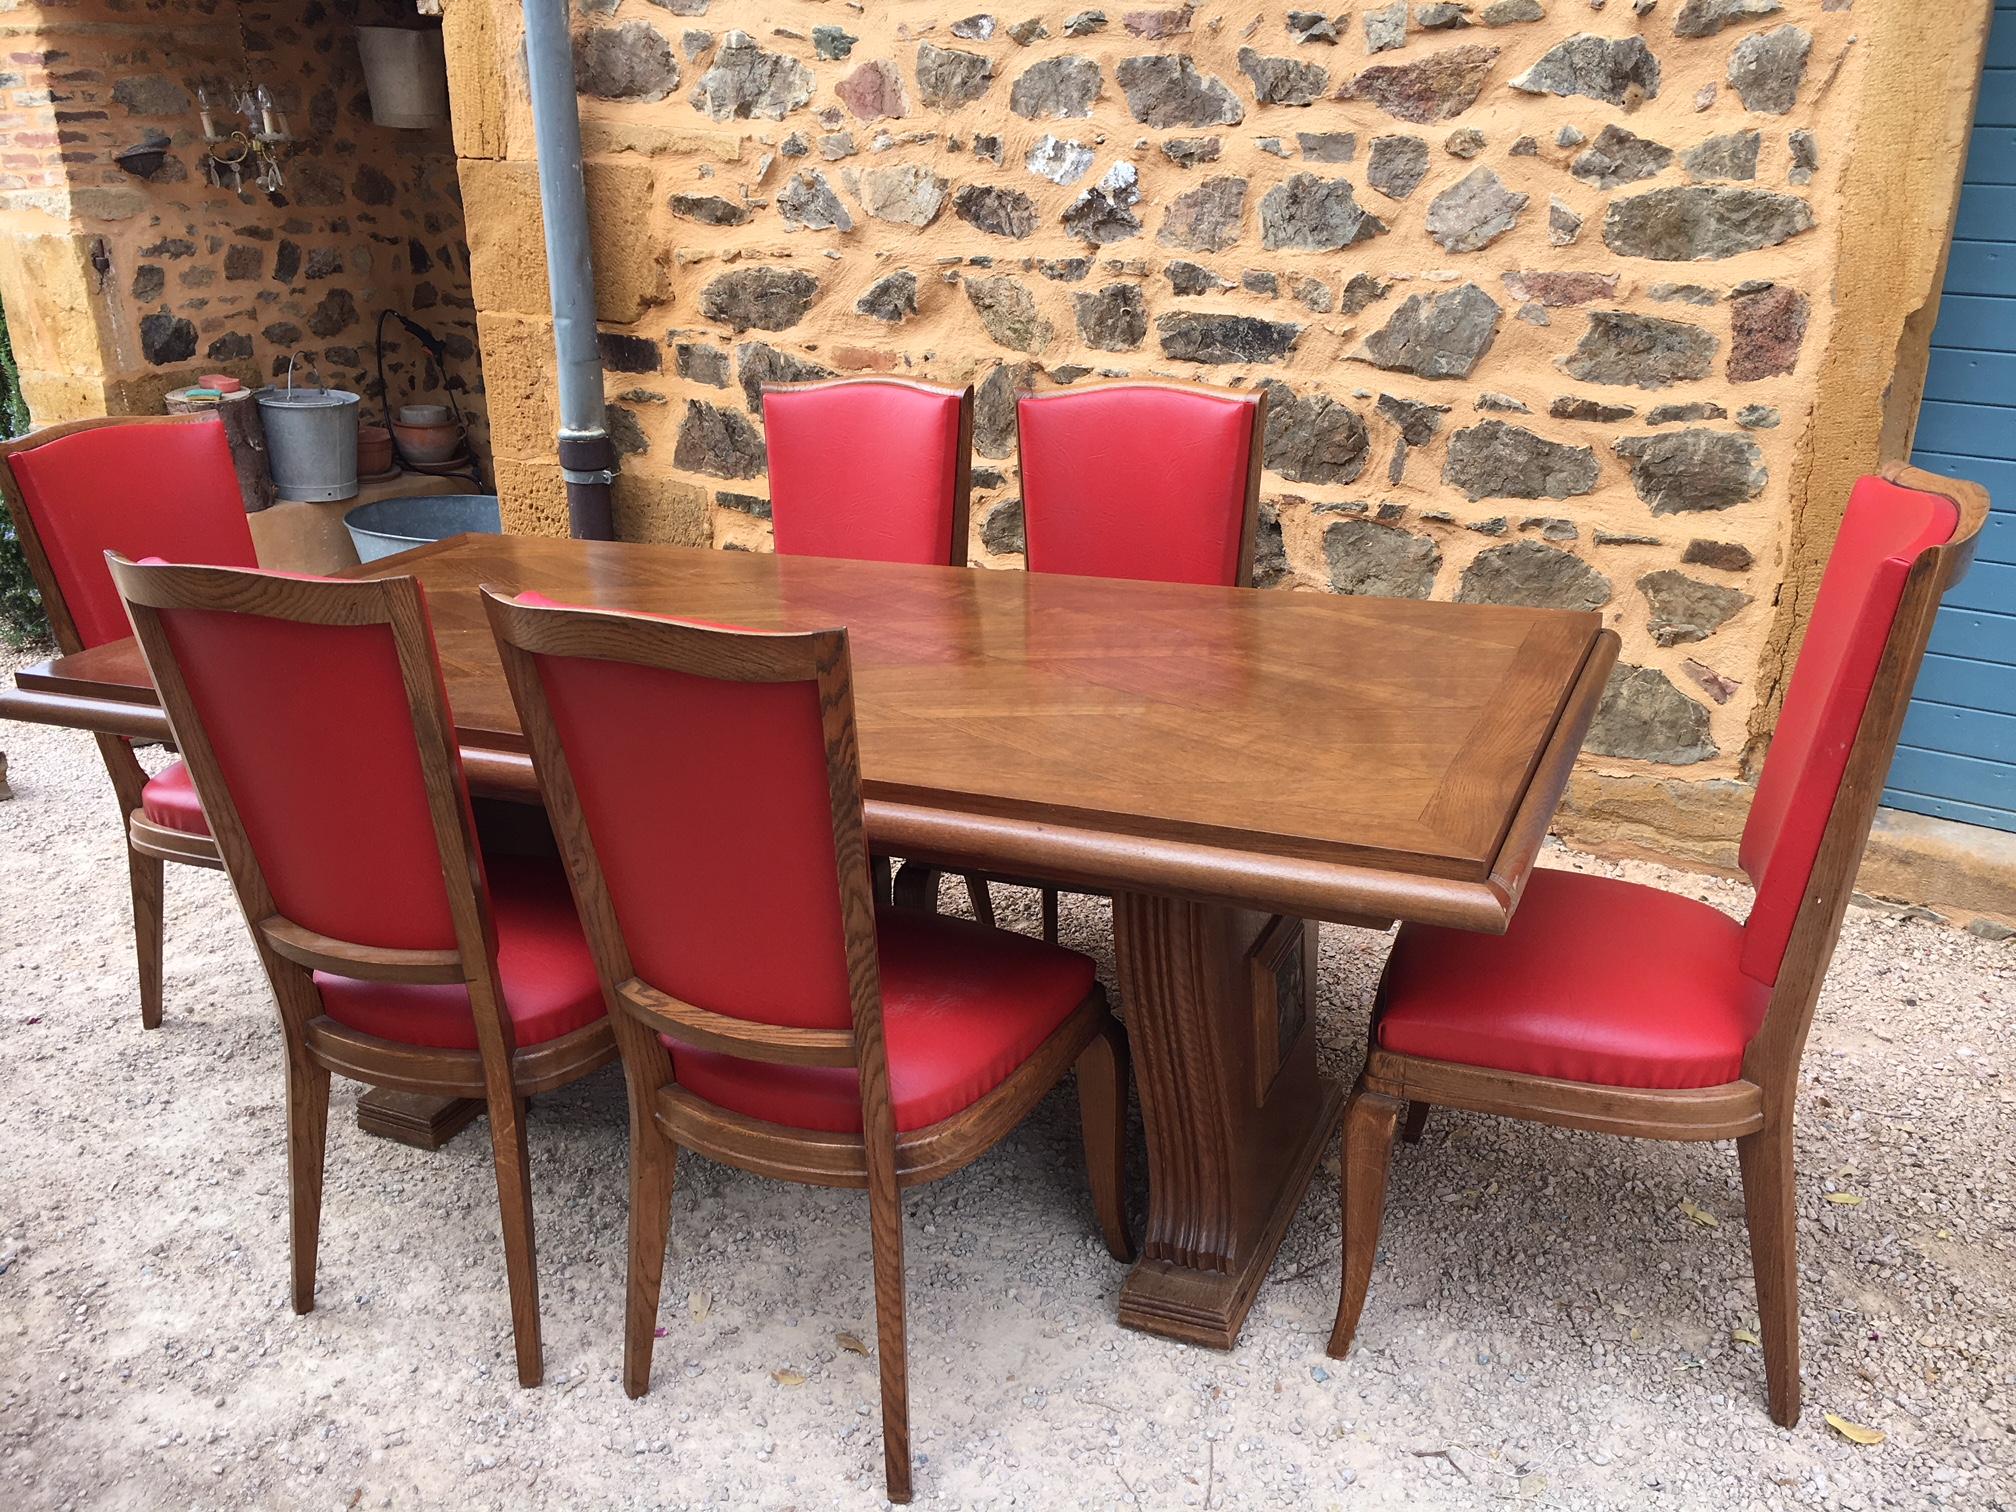 1940s dining table and chairs